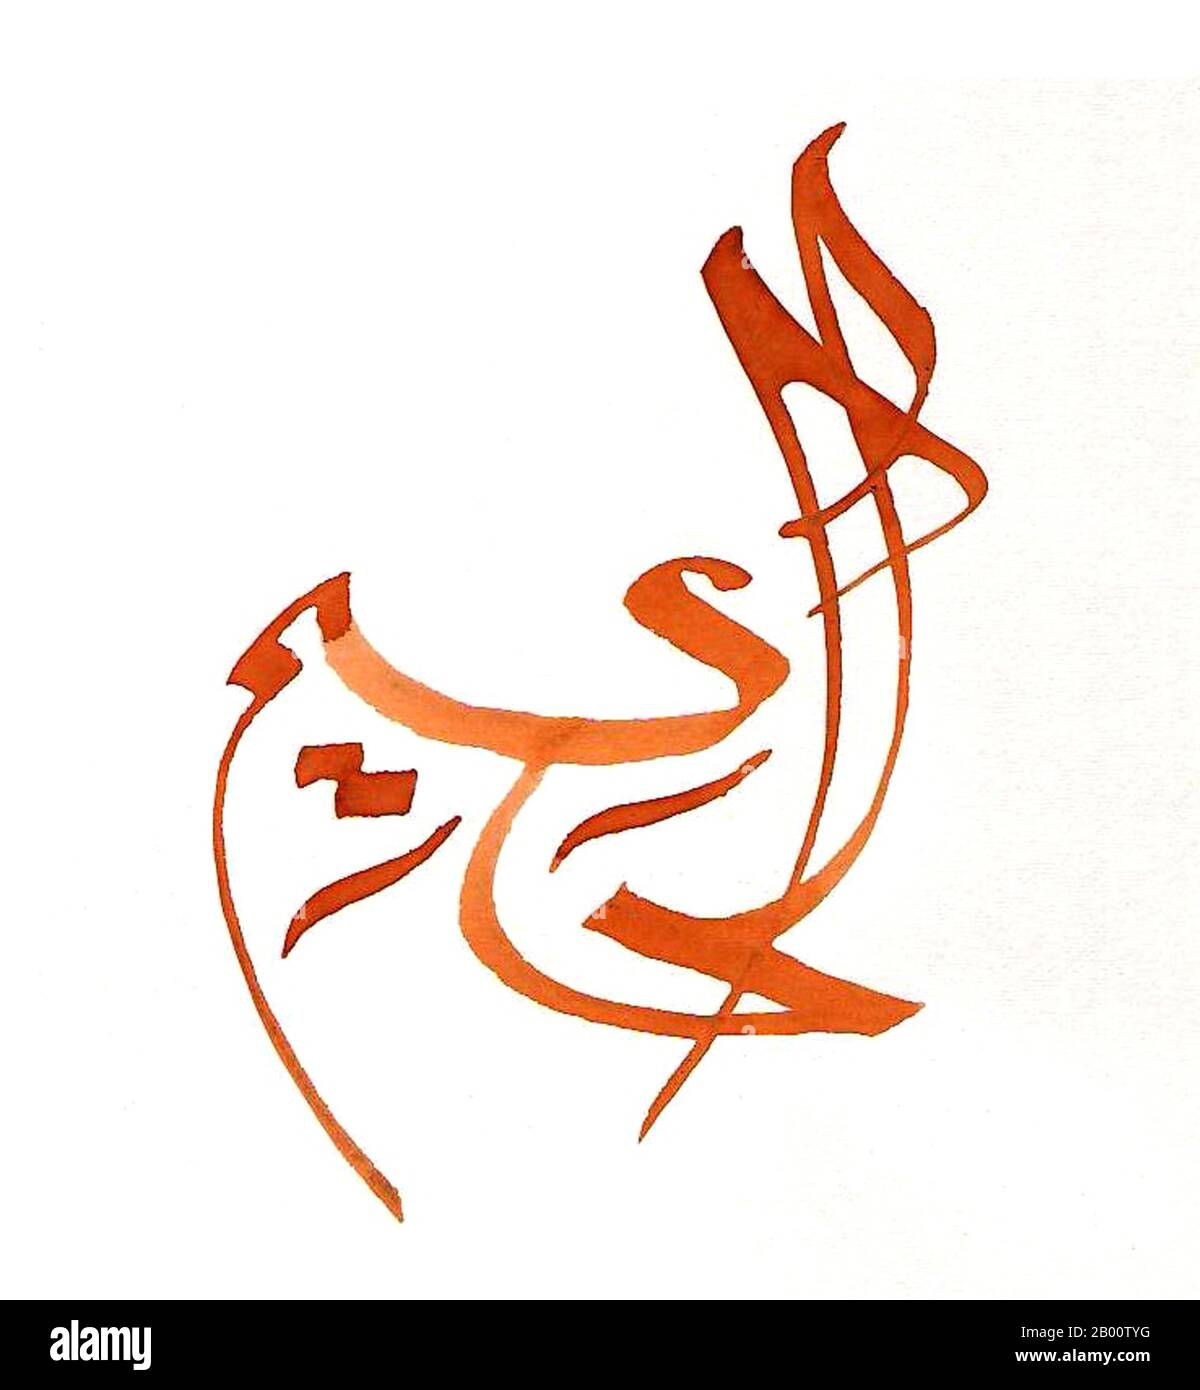 Islam: The name of Allah or God in Arabic script.  Allah is the standard Arabic name for God. While the term is best known in the West for its use by Muslims as a reference to God, it is used by Arabs of all Abrahamic faiths, including Jews and Christians (and more recently Bahai), in reference to God. Stock Photo